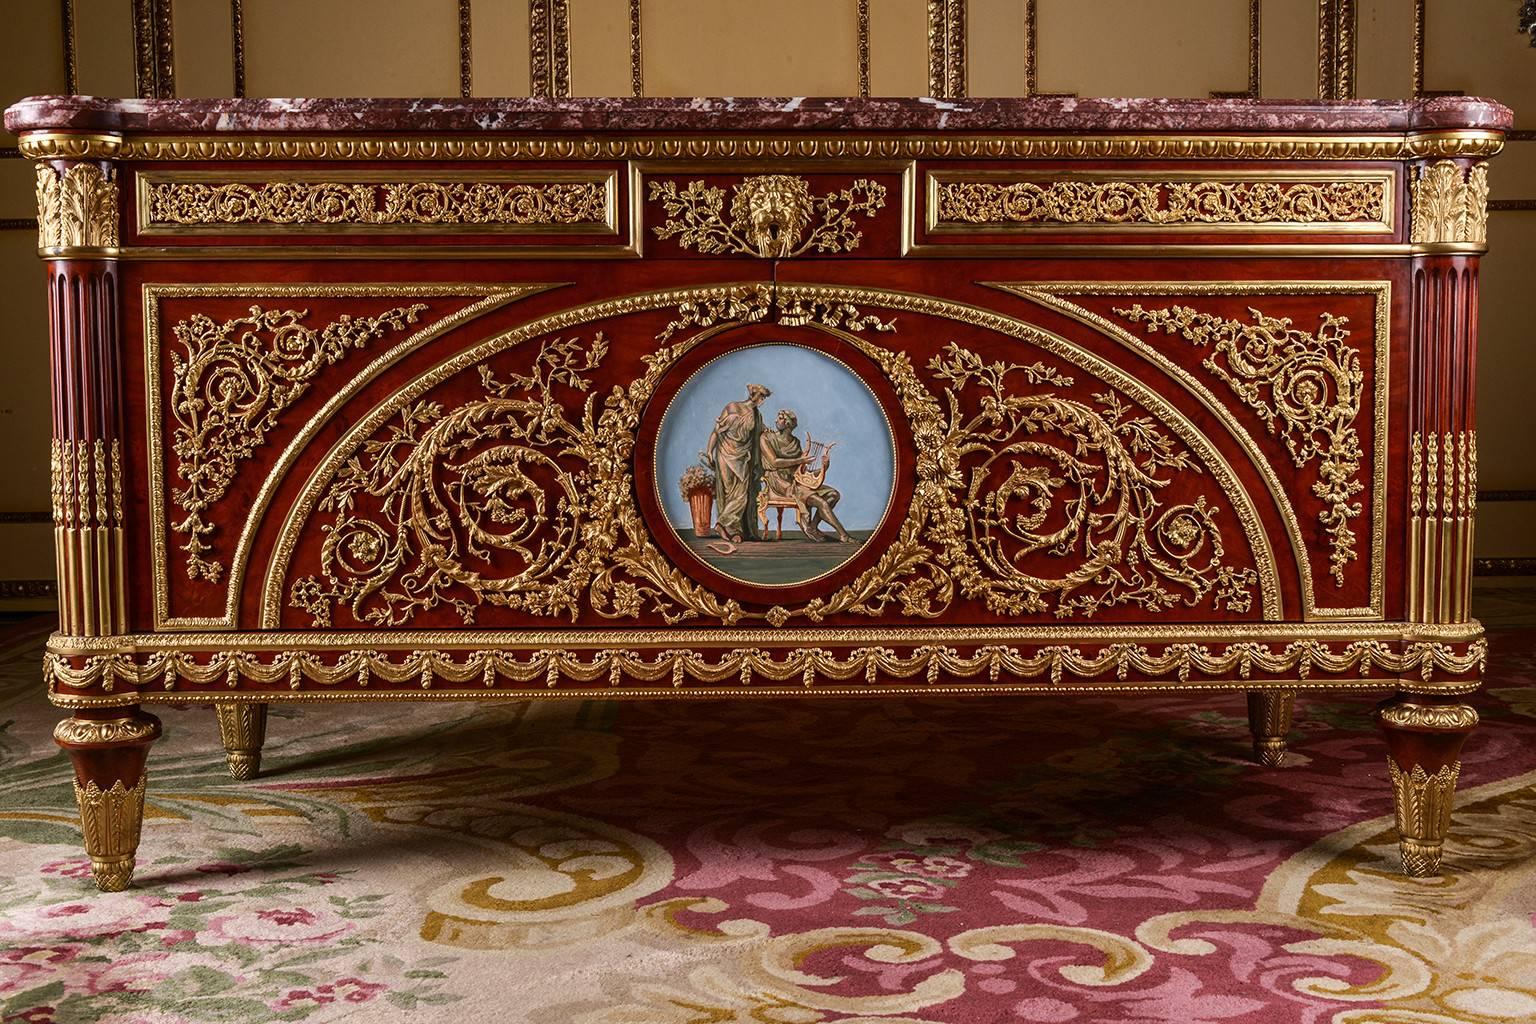 Veneered roots on solid oak and pine. Exceptionally fine engraved and richly moulded bronze Appliqués. Right Angled Body. In the bowed front can be
found two wide doors with recessed contents, flanked by conical, grooved legs, ending in sabots. The